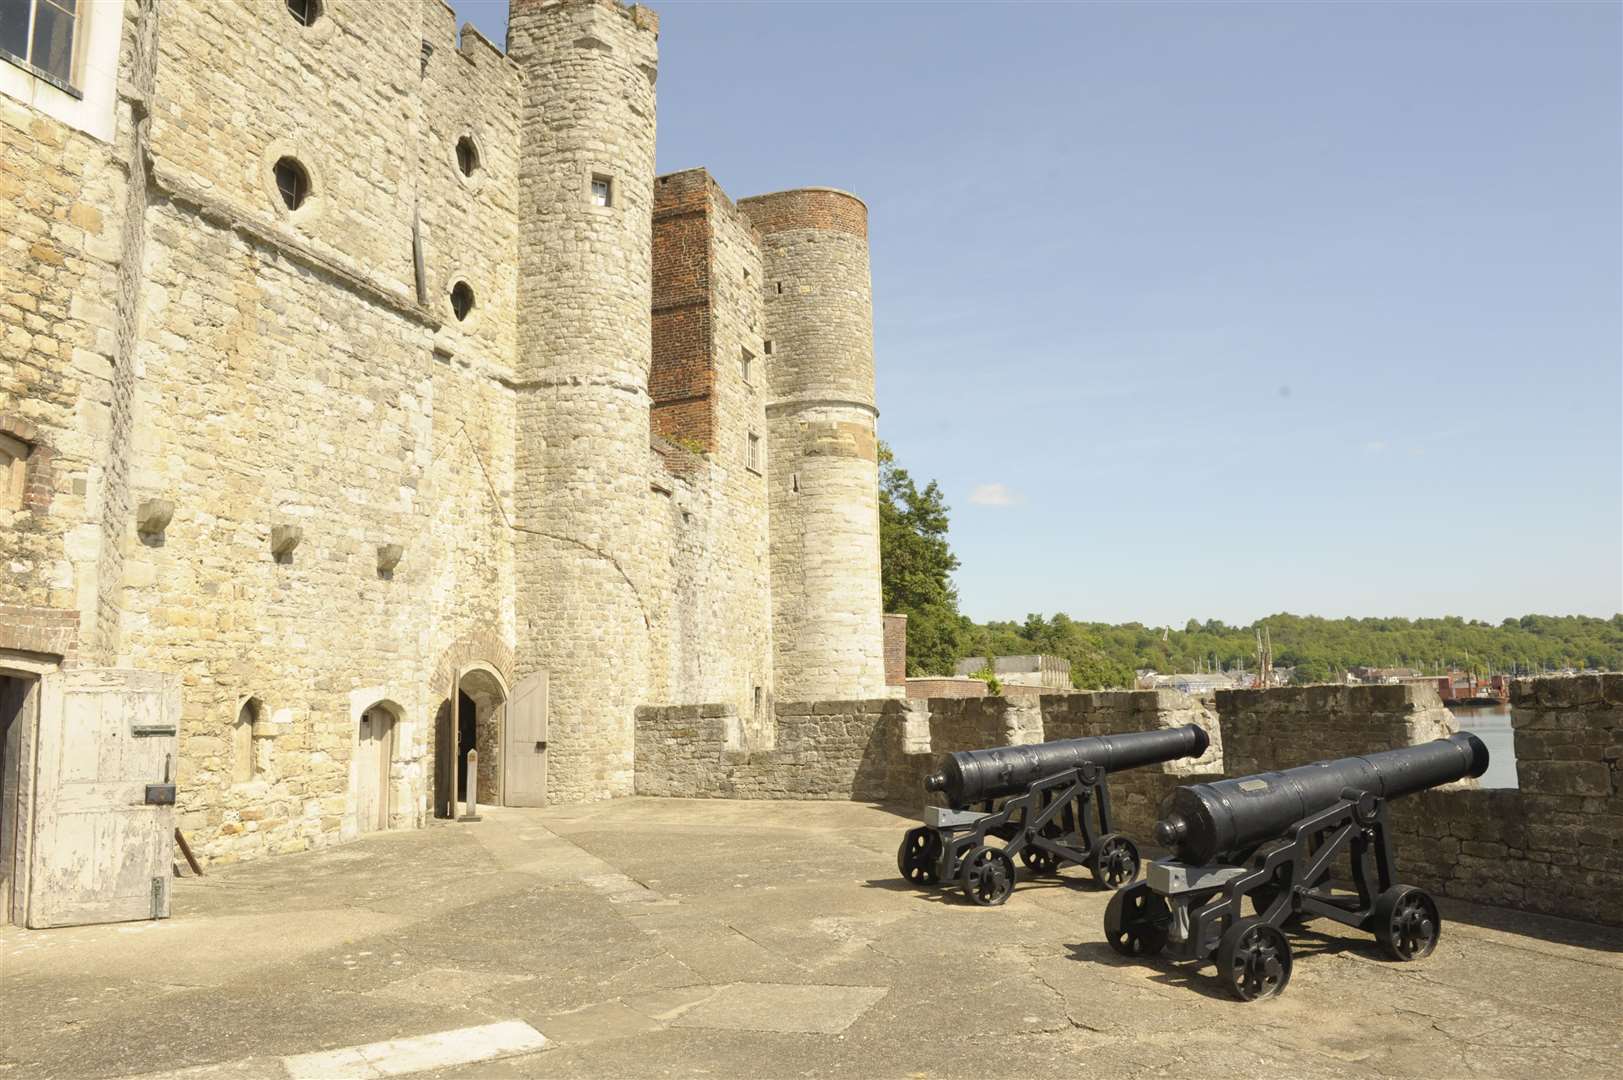 Upnor Castle was built during the 16th century and is said to be the only English coastal defence to fire in anger